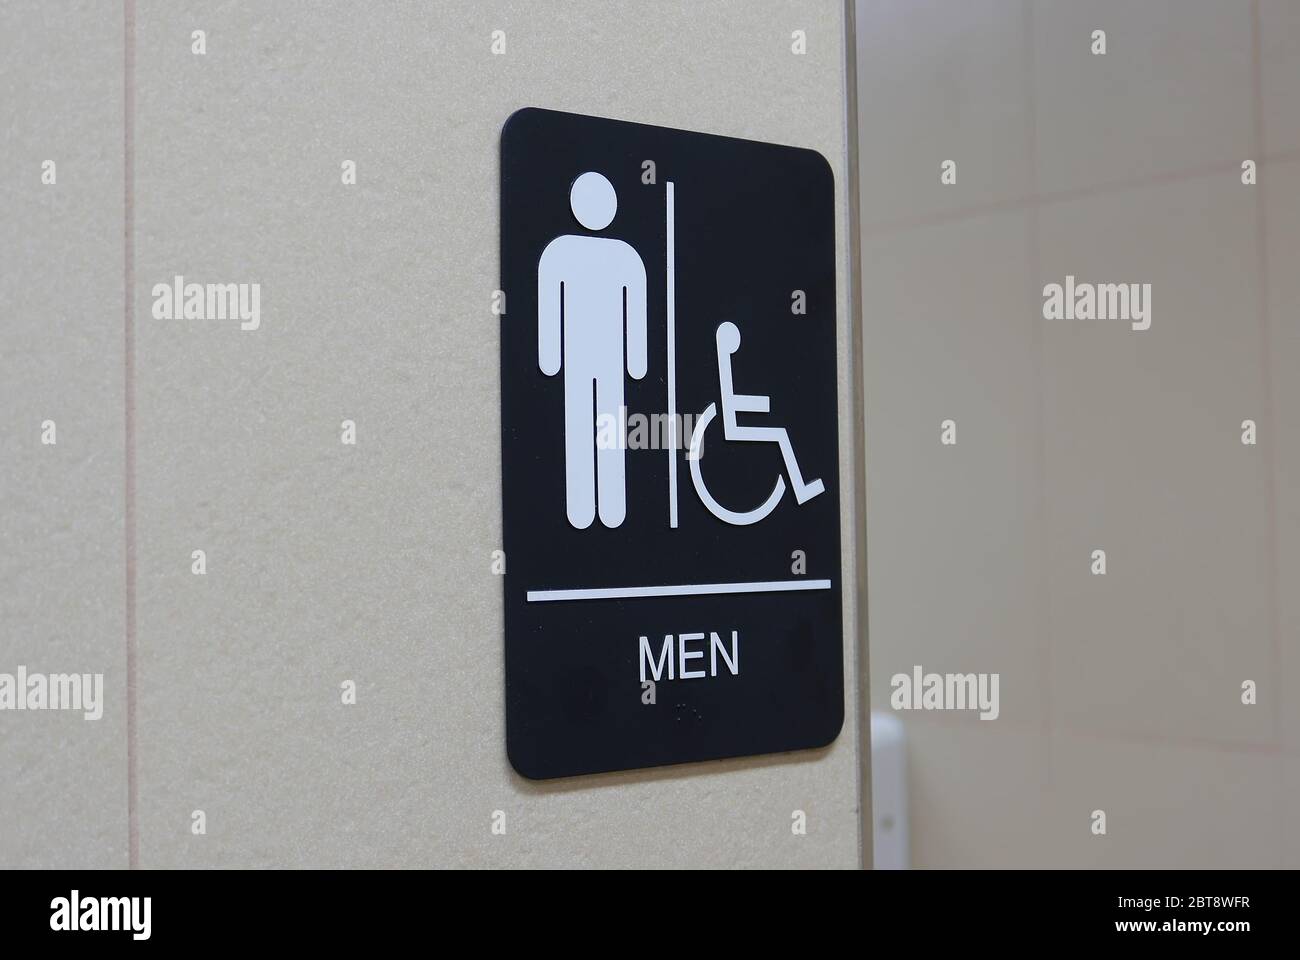 Motion of man and disable washroom logo on wall Stock Photo